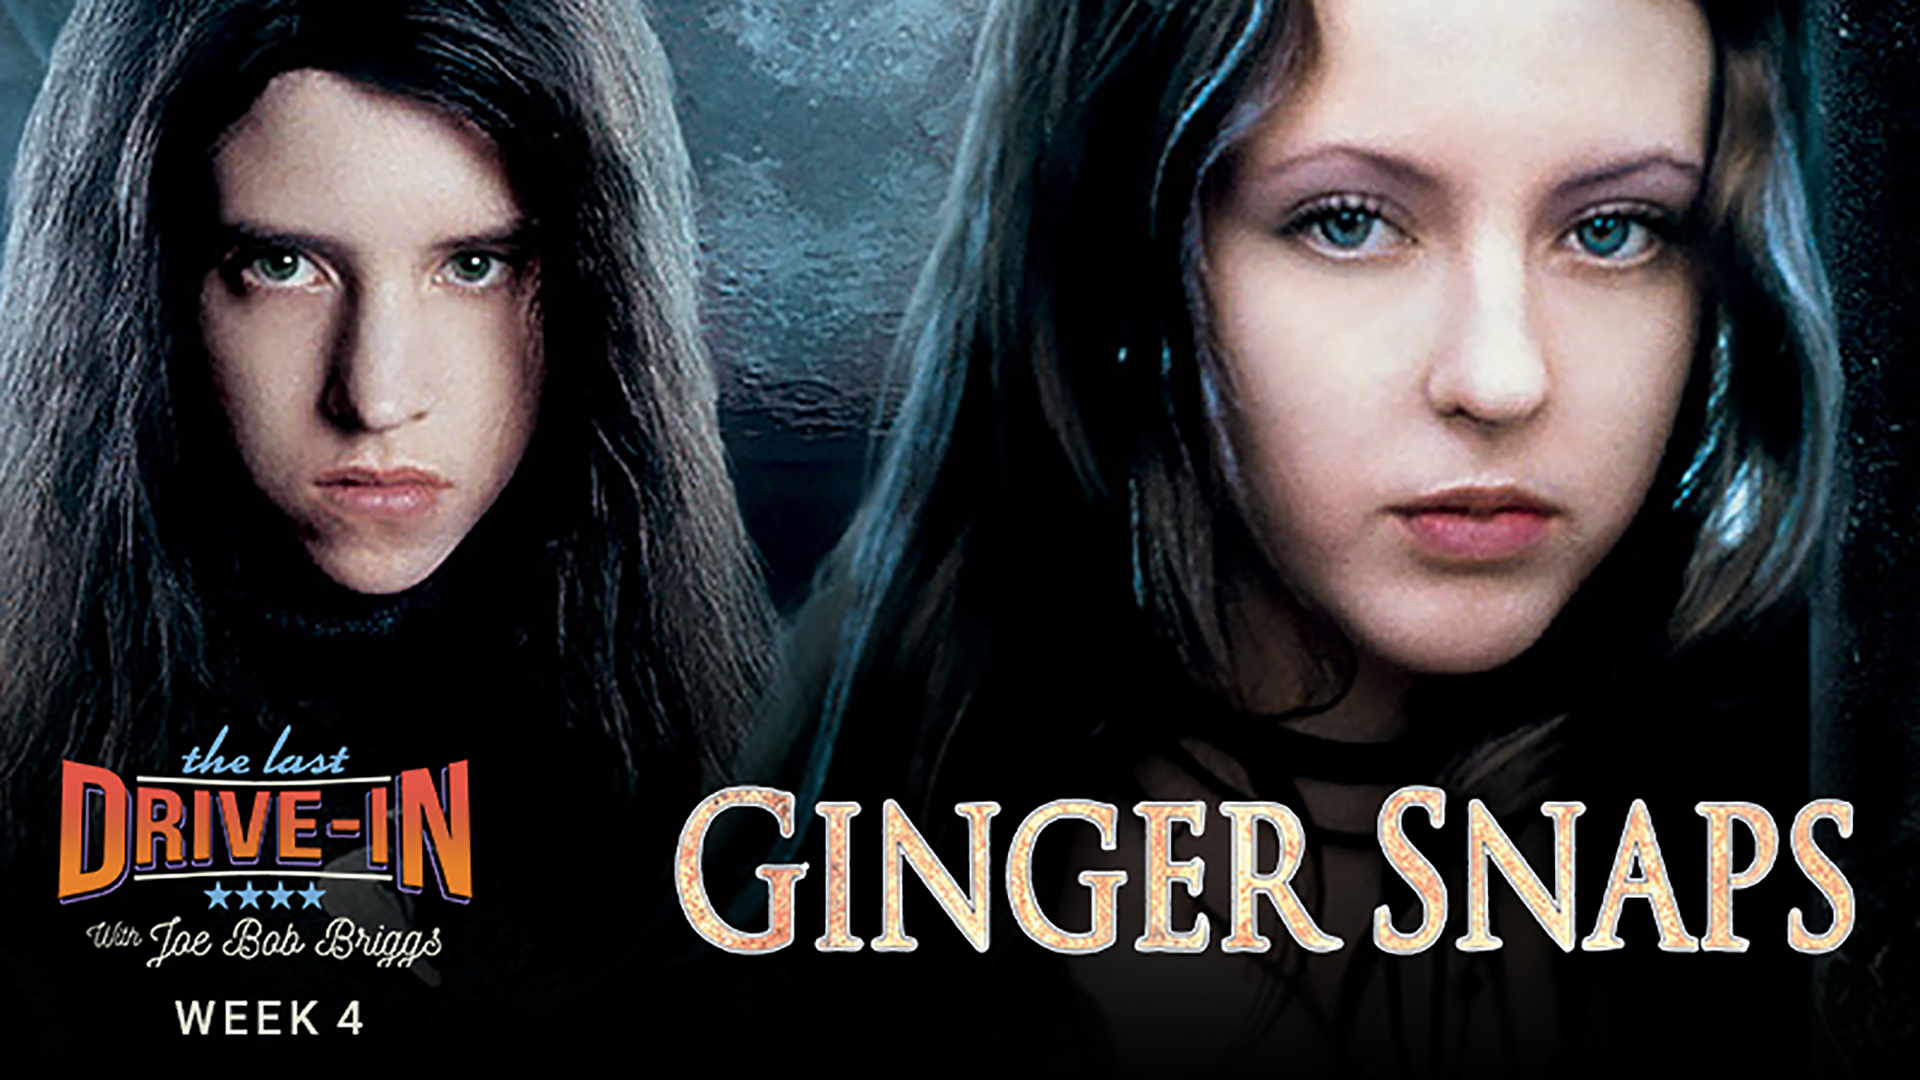 Week 4: Ginger Snaps, Two outcast sisters must deal with the tragic consequences when one of them is bitten by a werewolf., TV-MA, Season 1028423, Episode 7